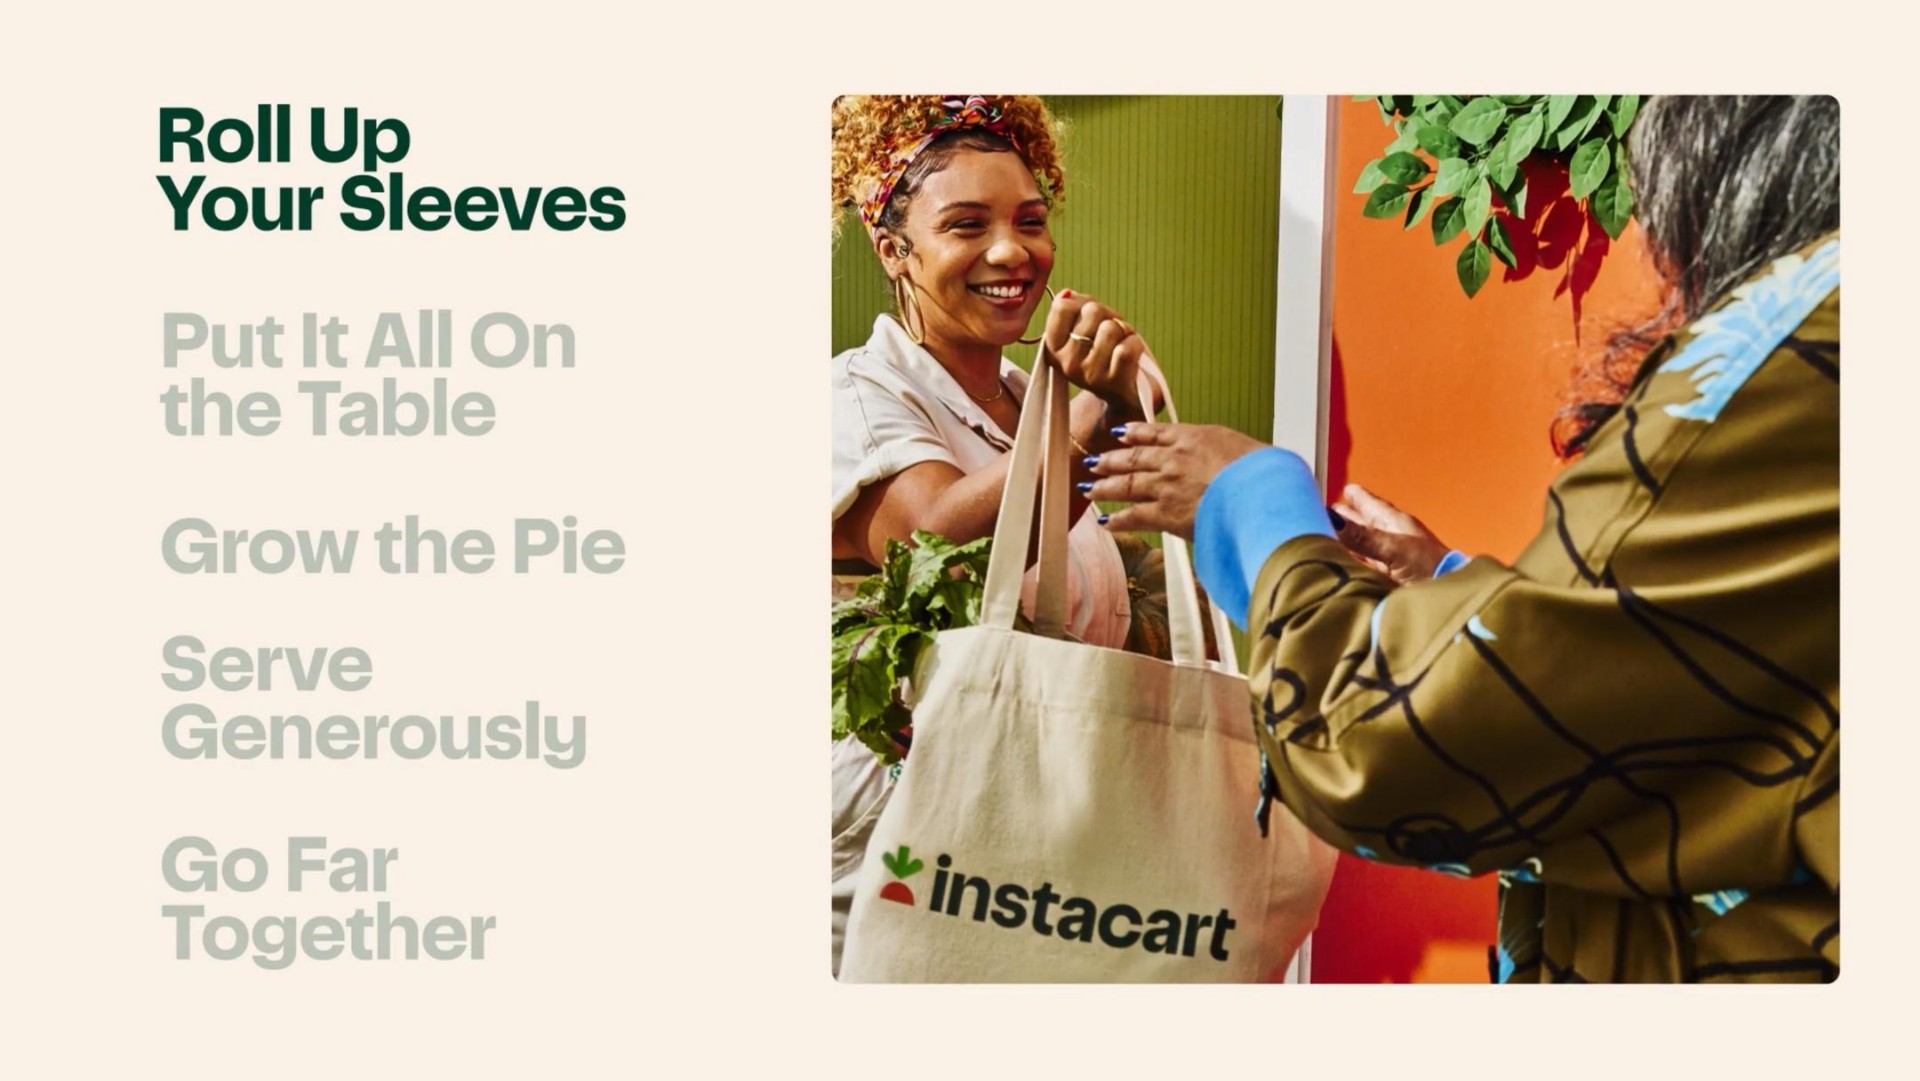 roll up your sleeves | Instacart